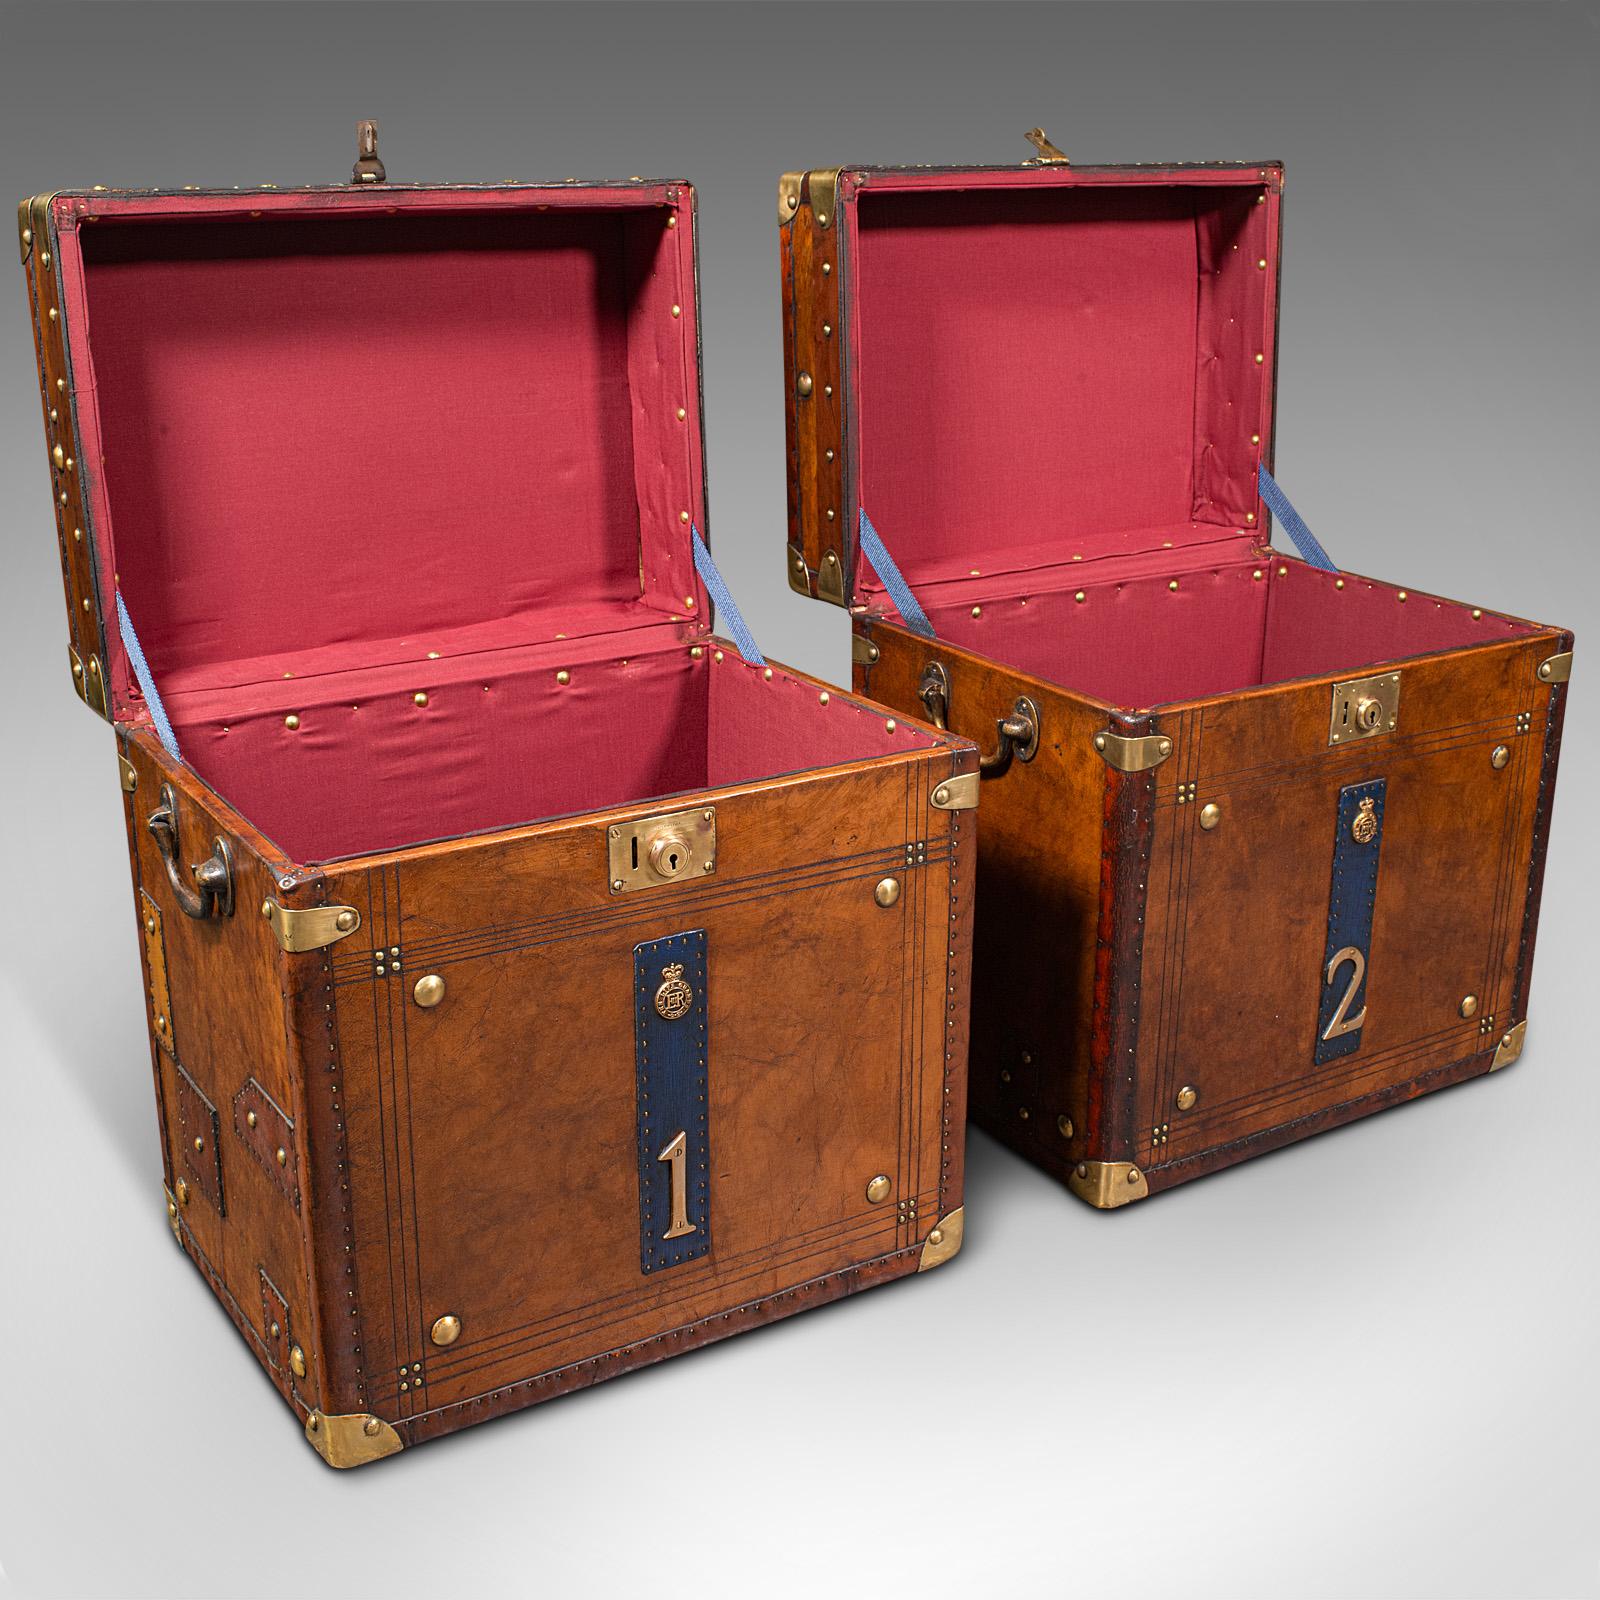 This is a pair of vintage campaign luggage cases. An English, leather and brass military interest bedside nightstand, dating to the mid 20th century, circa 1950.
 
High quality casework, with great colour and detail
Displaying a desirable aged